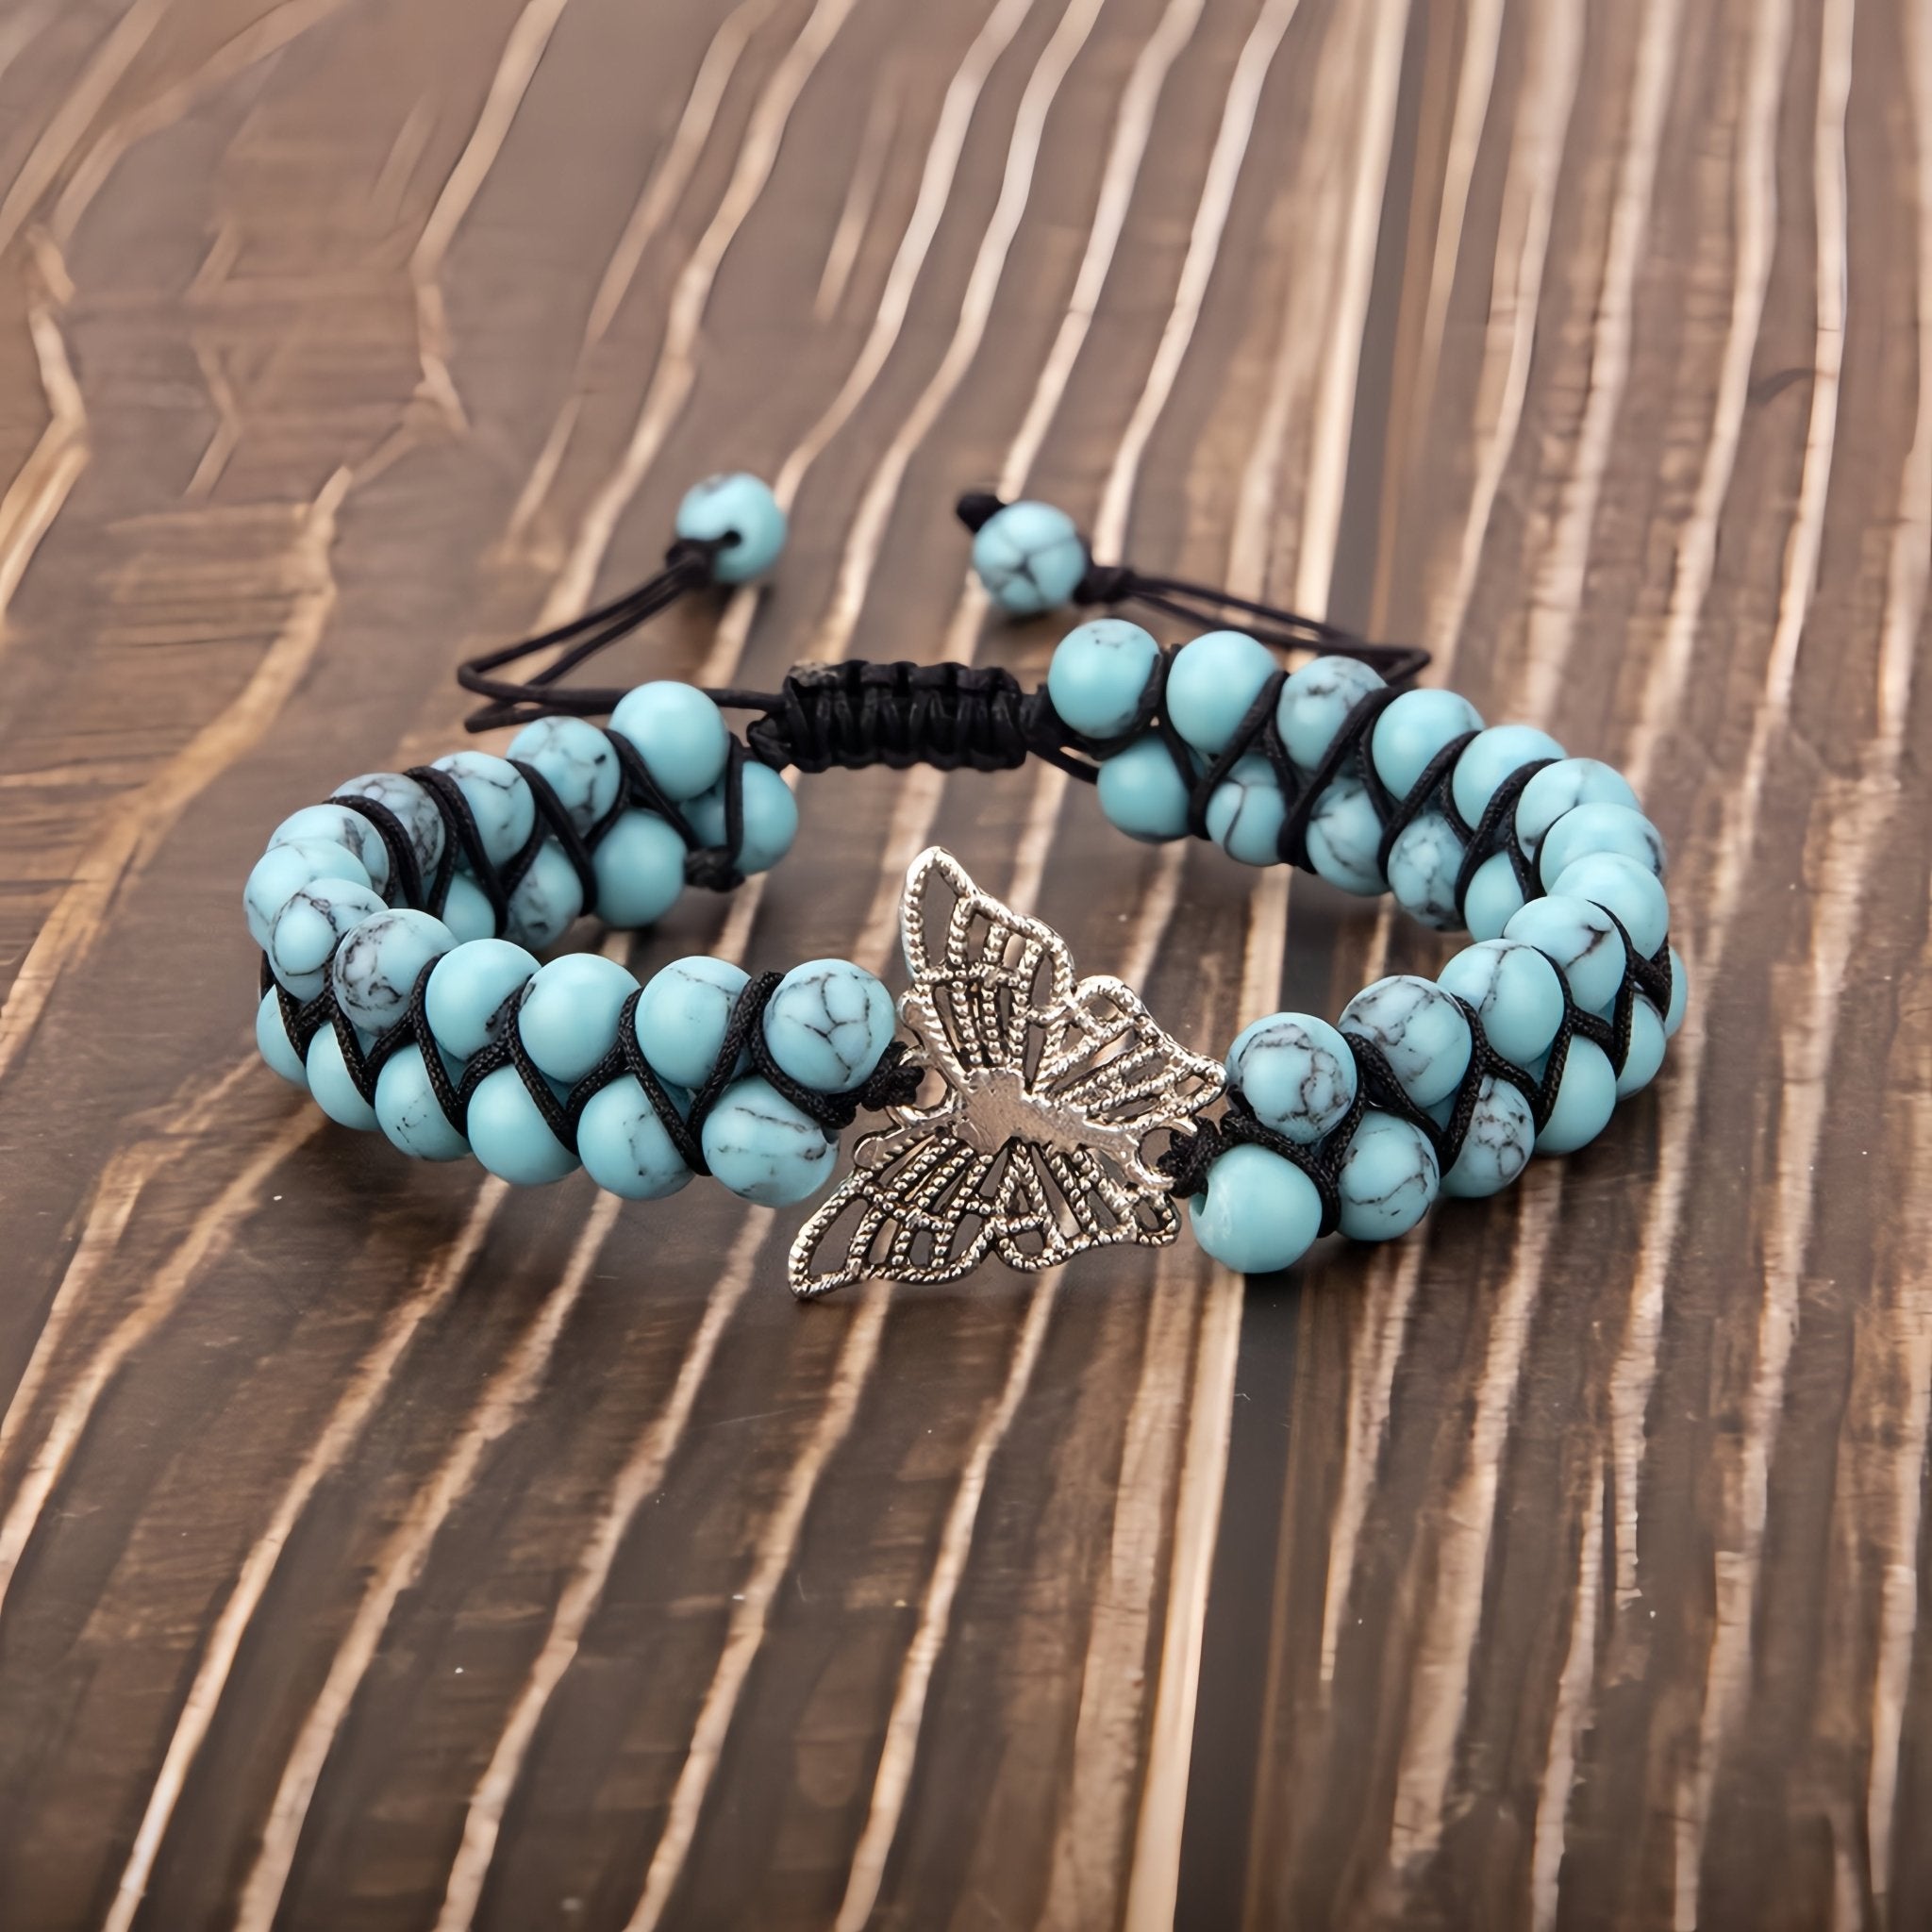 Natural stone turquoise yoga bracelet with a silver tree of life charm.